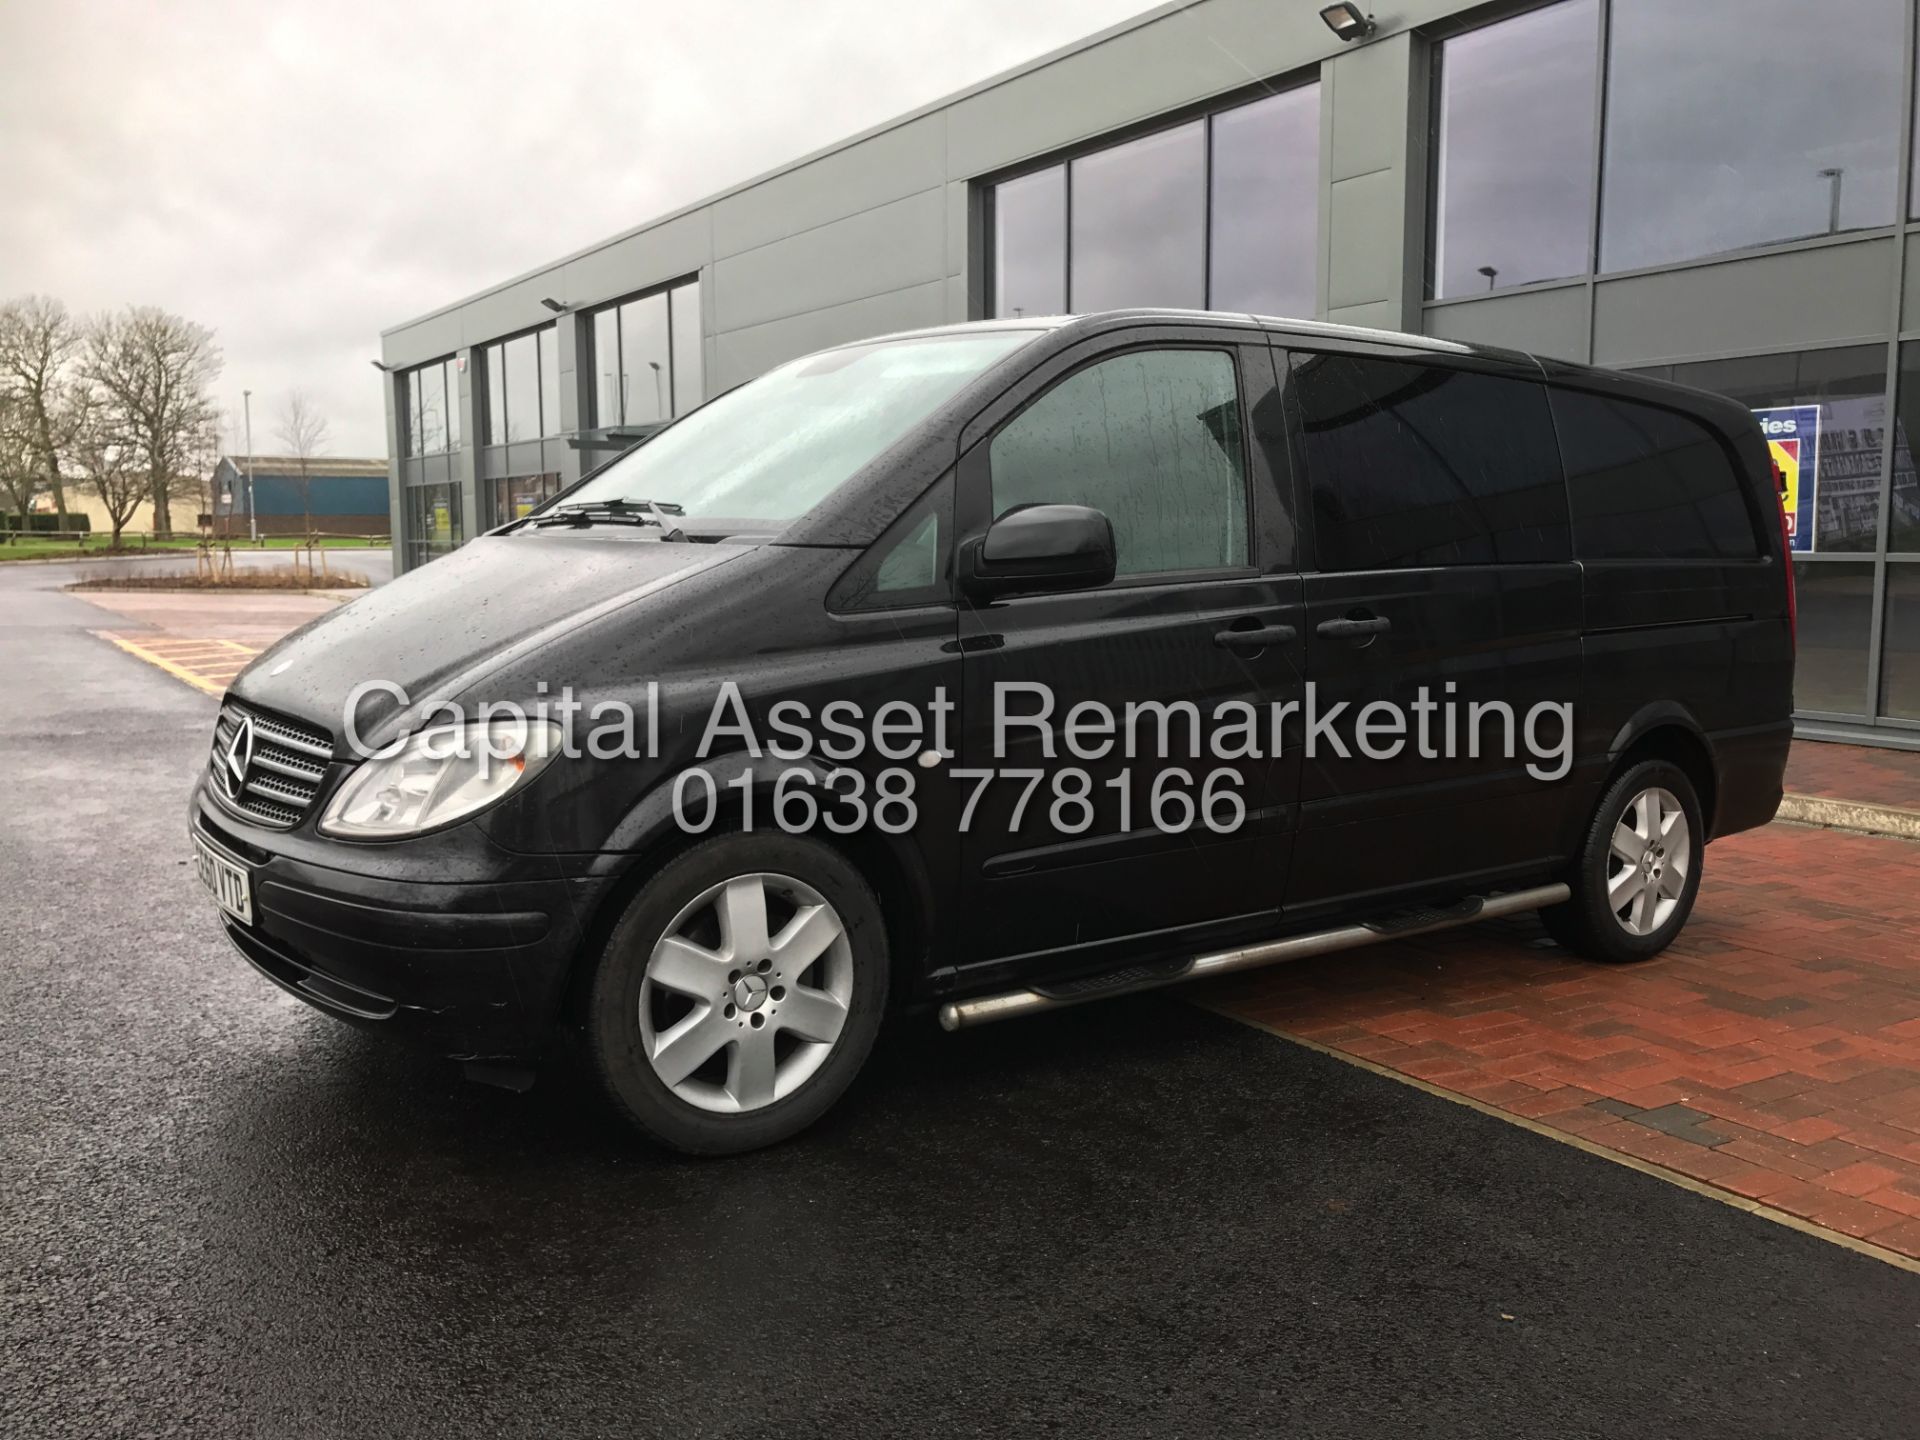 (ON SALE) MERCEDES VITO "SPORTY - 115BHP" LWB (2011 MODEL) 5 SEATER DUELINER -1 OWNER-AIR CON-ALLOYS - Bild 5 aus 18